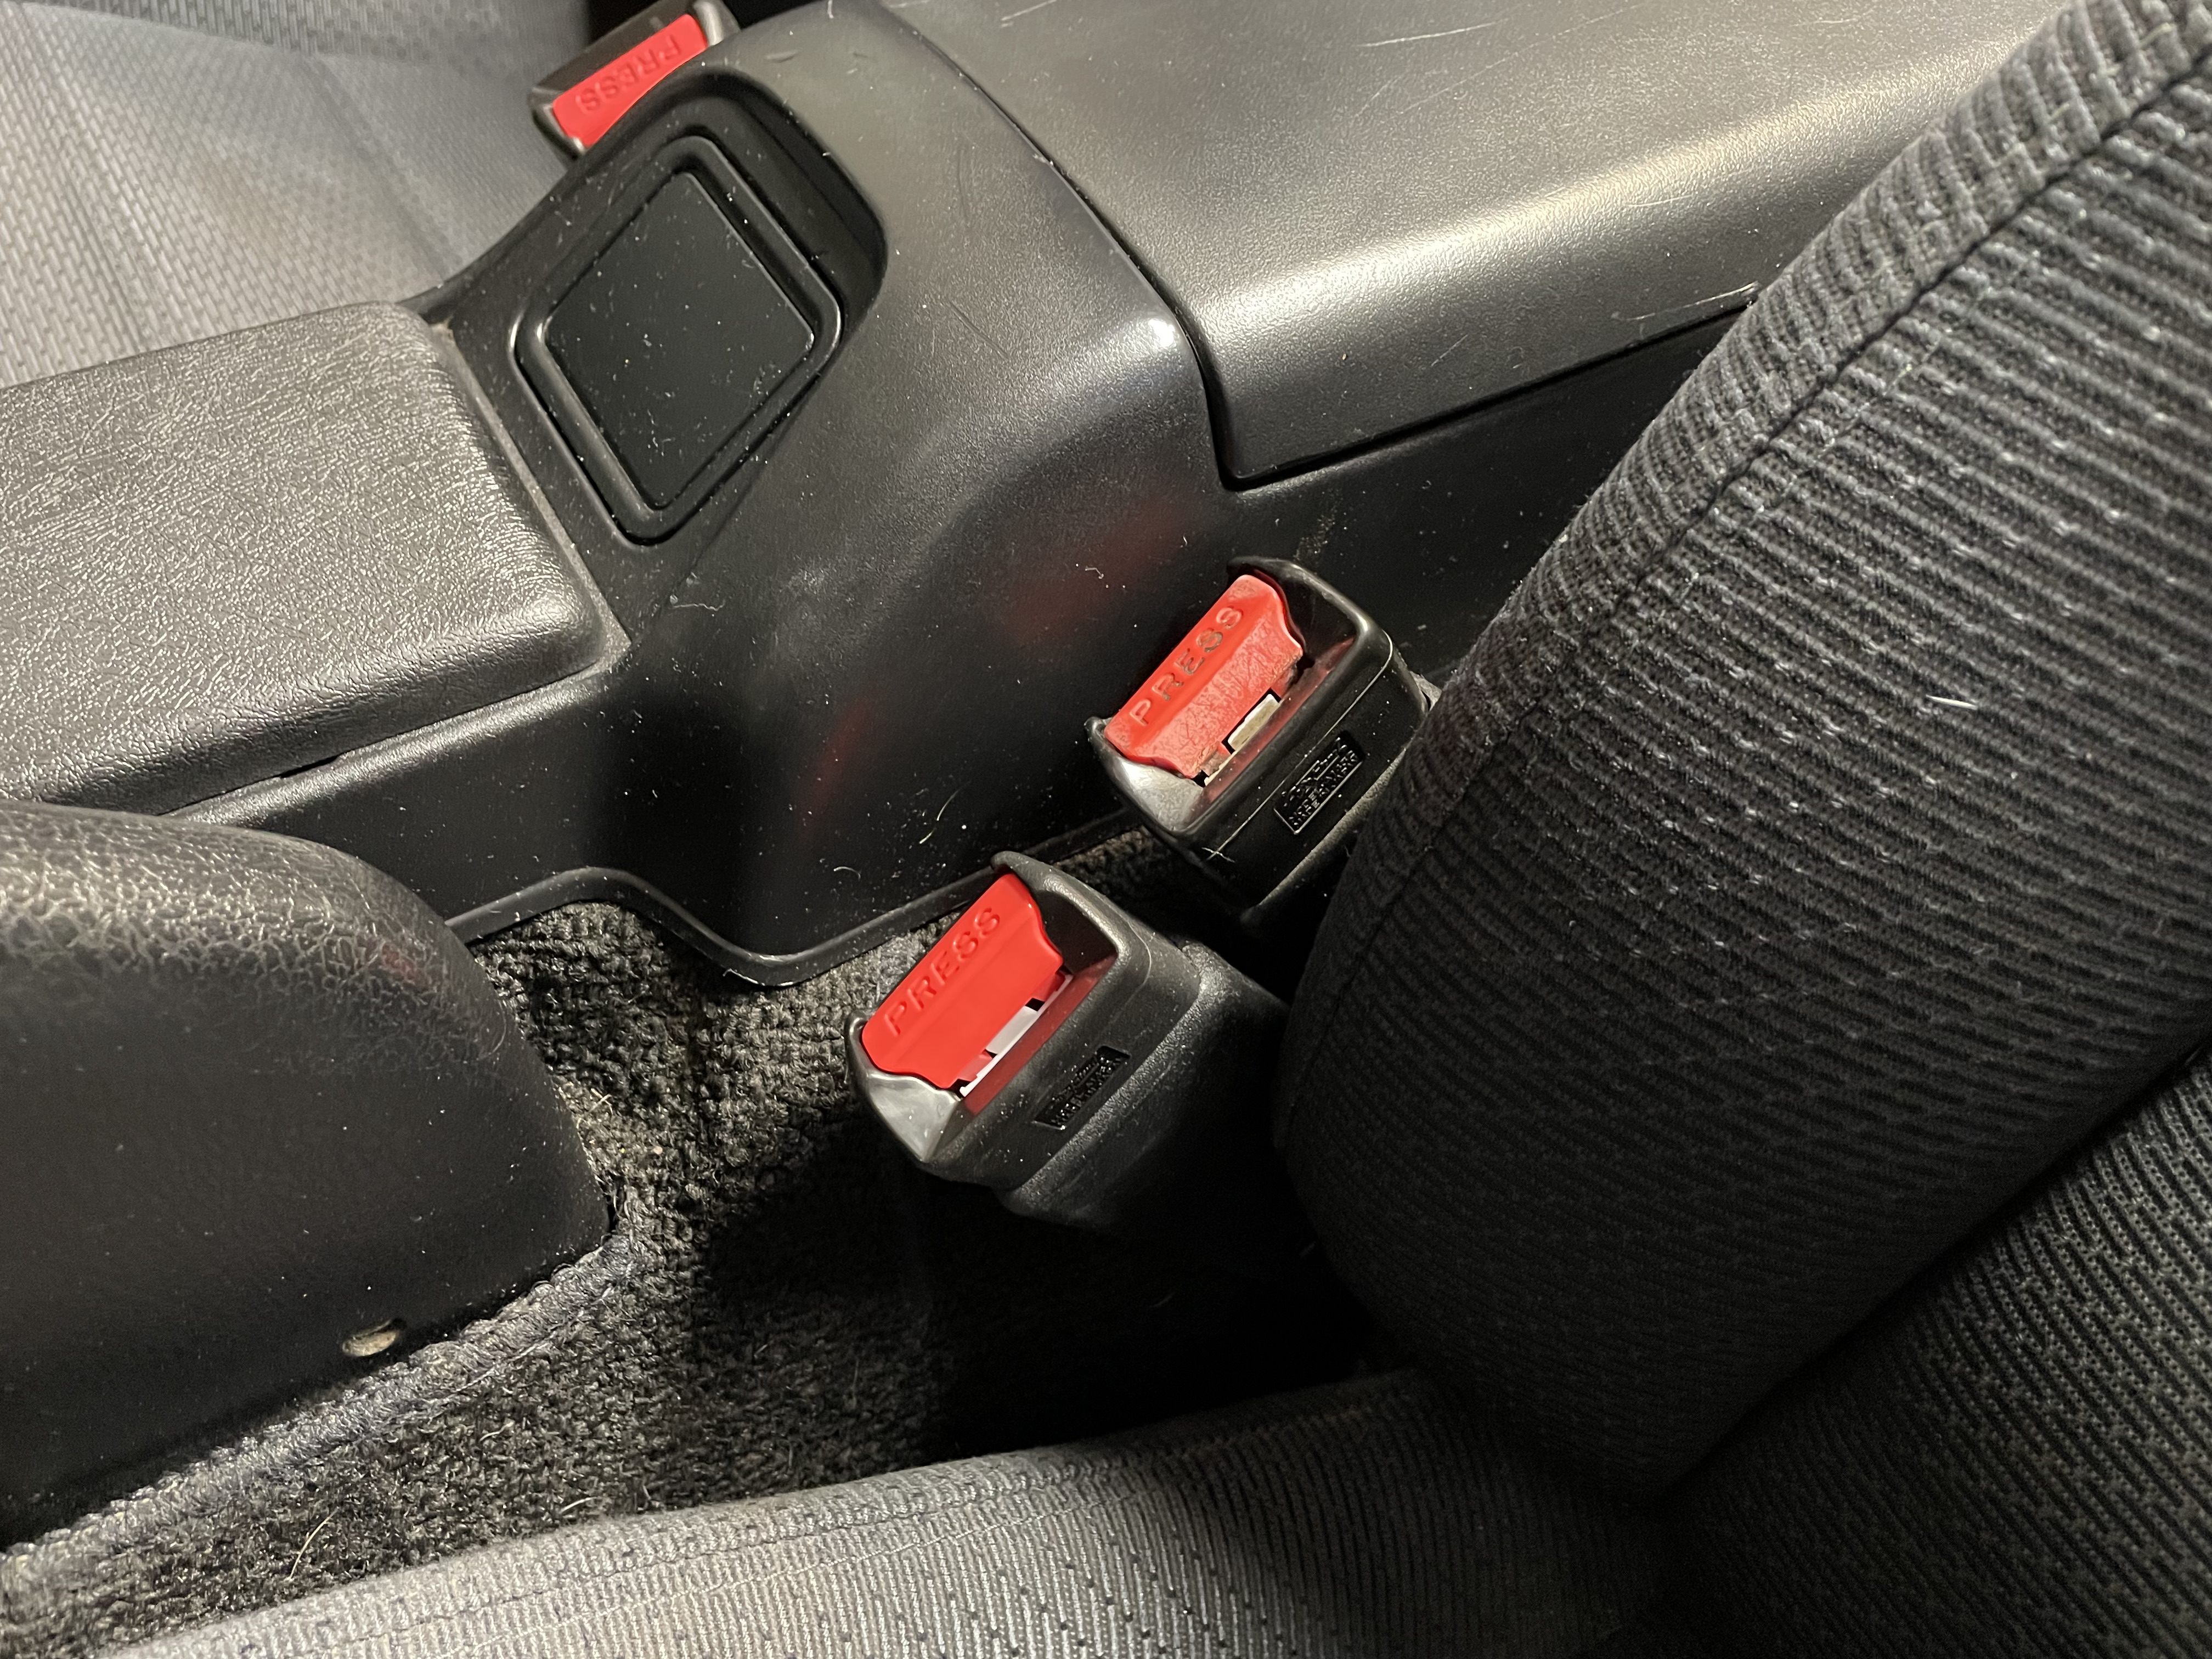 New seat belt receptacle installed with the old one positioned